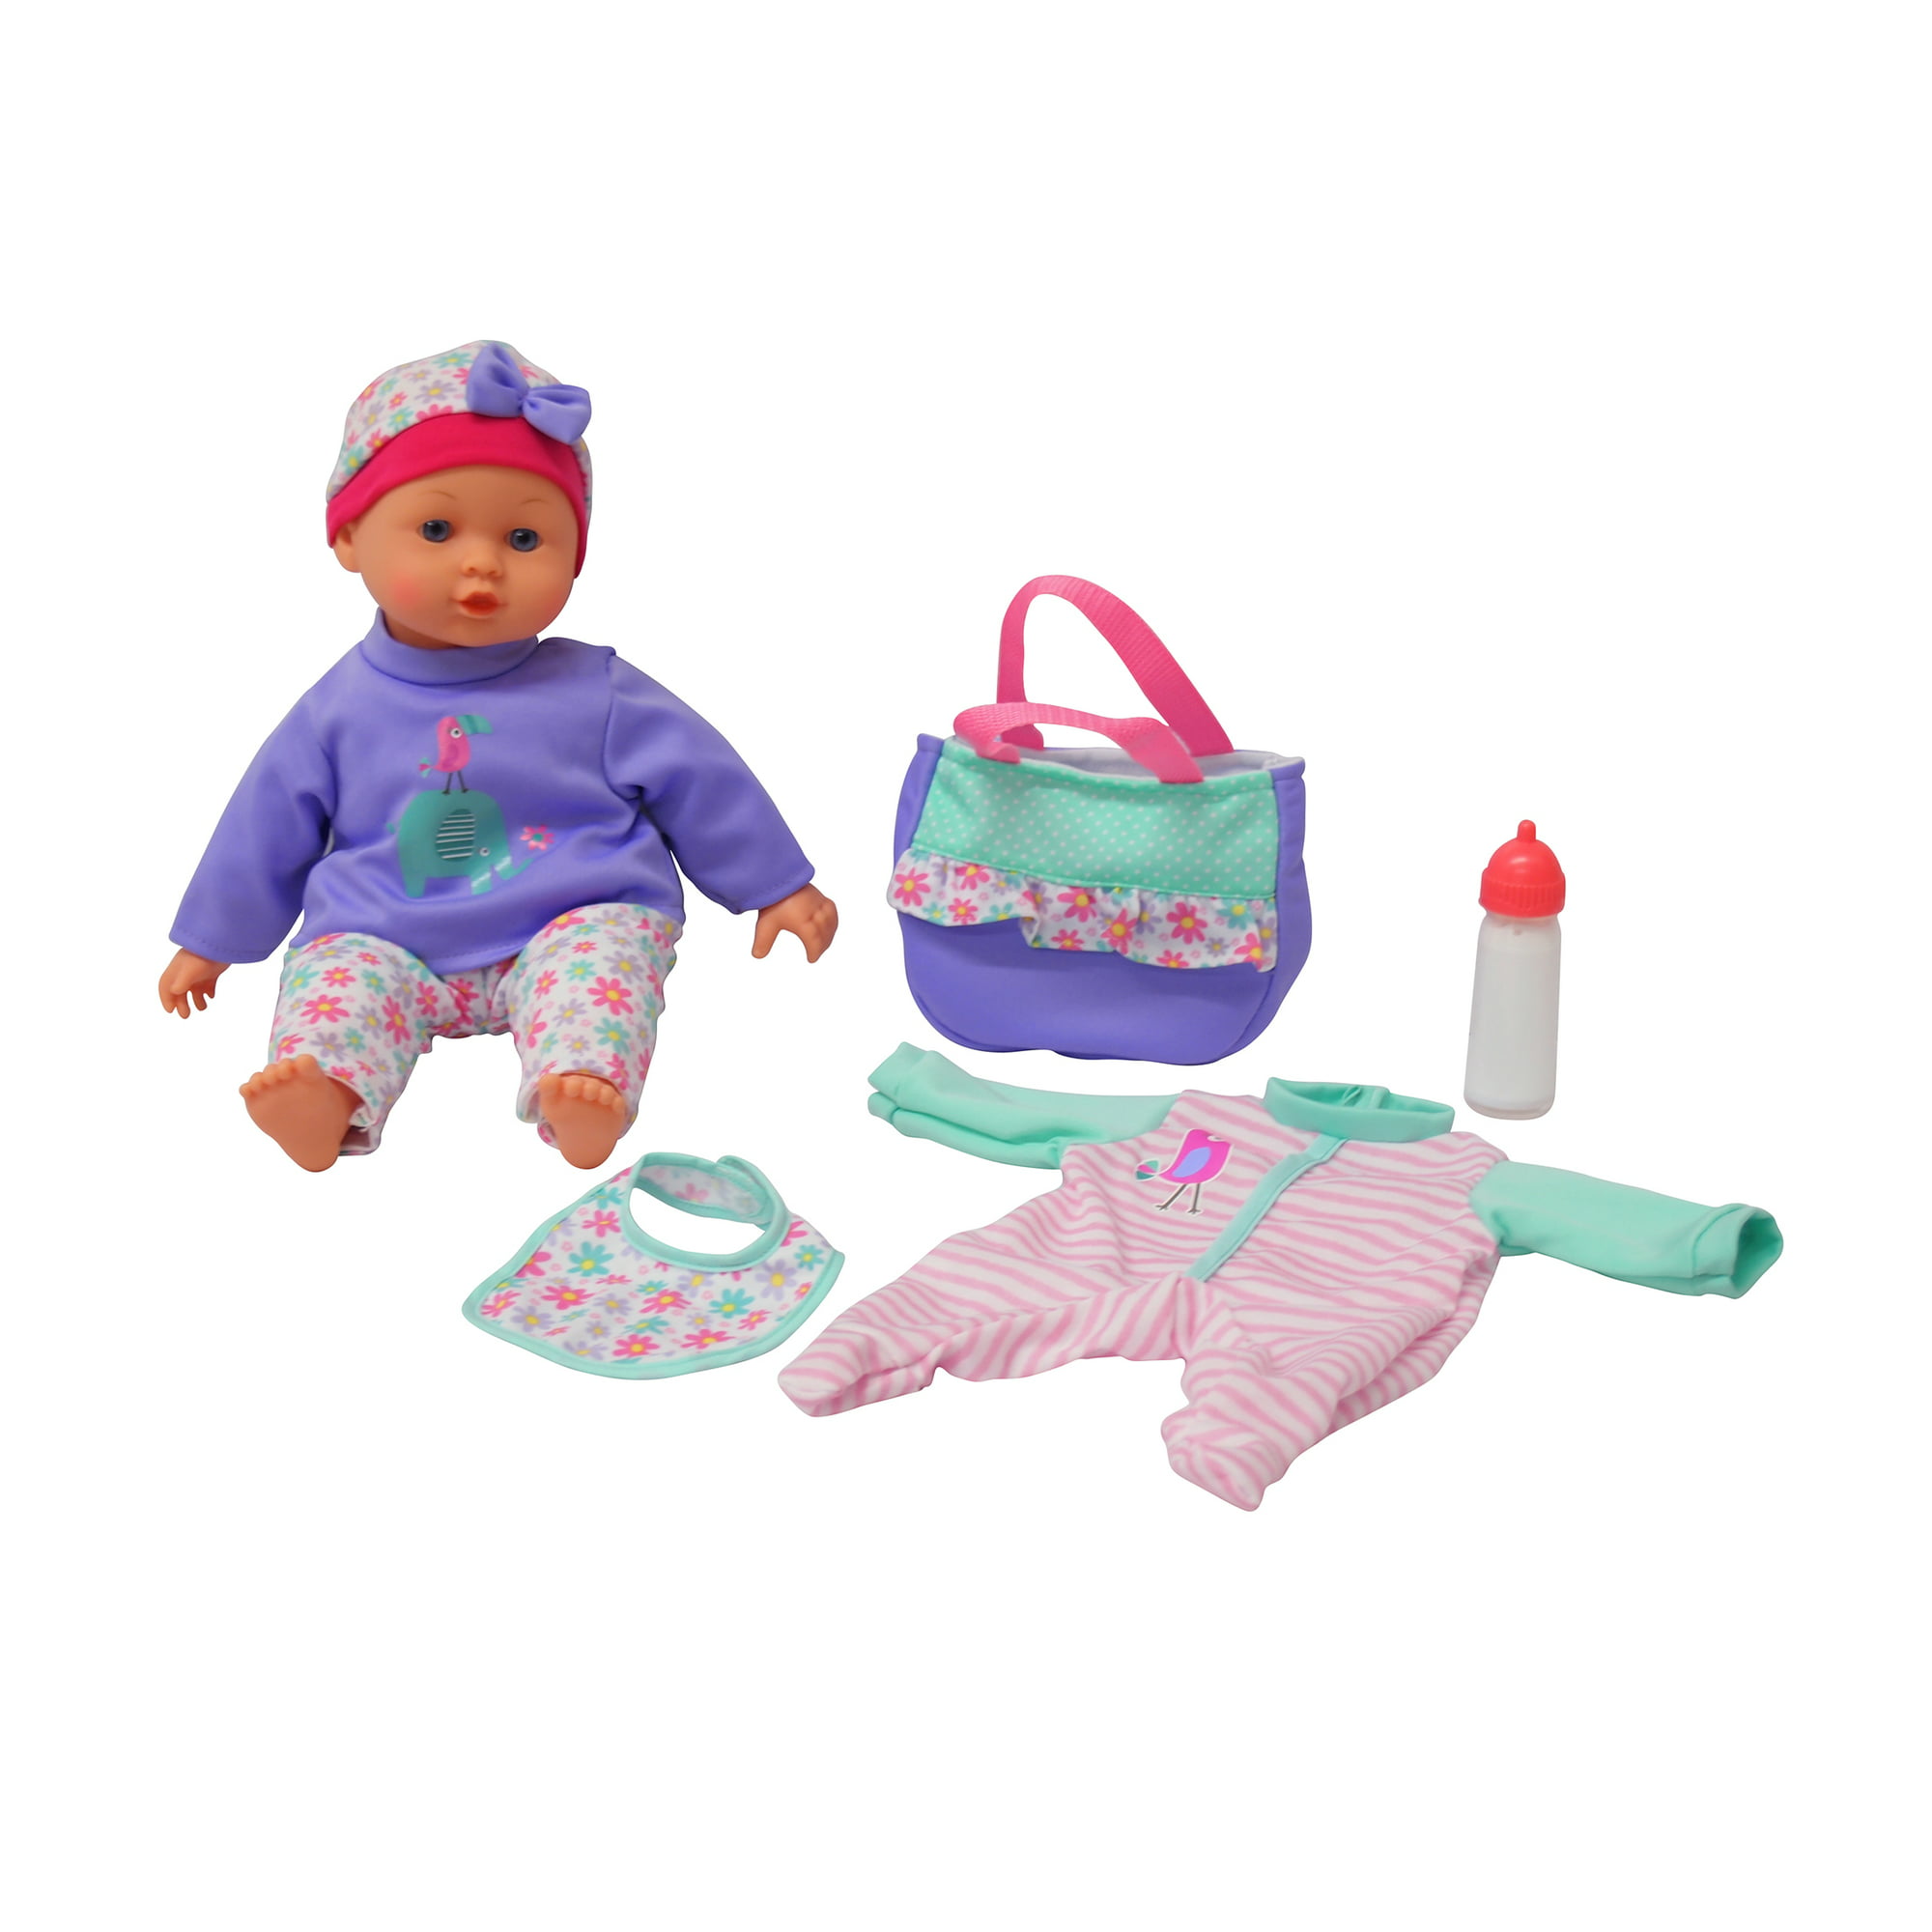 dybde perspektiv Af storm Dream Collection 14 inch Baby Doll Gift Set W / Accessories - Walmart.com